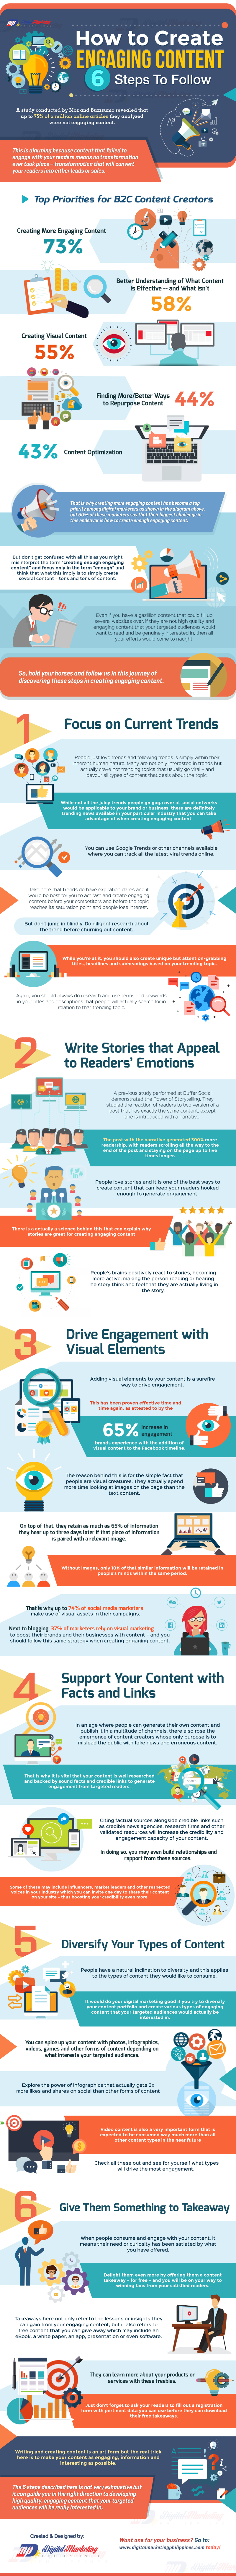 How to Create Engaging Content – 6 Steps to Follow - #Infographic